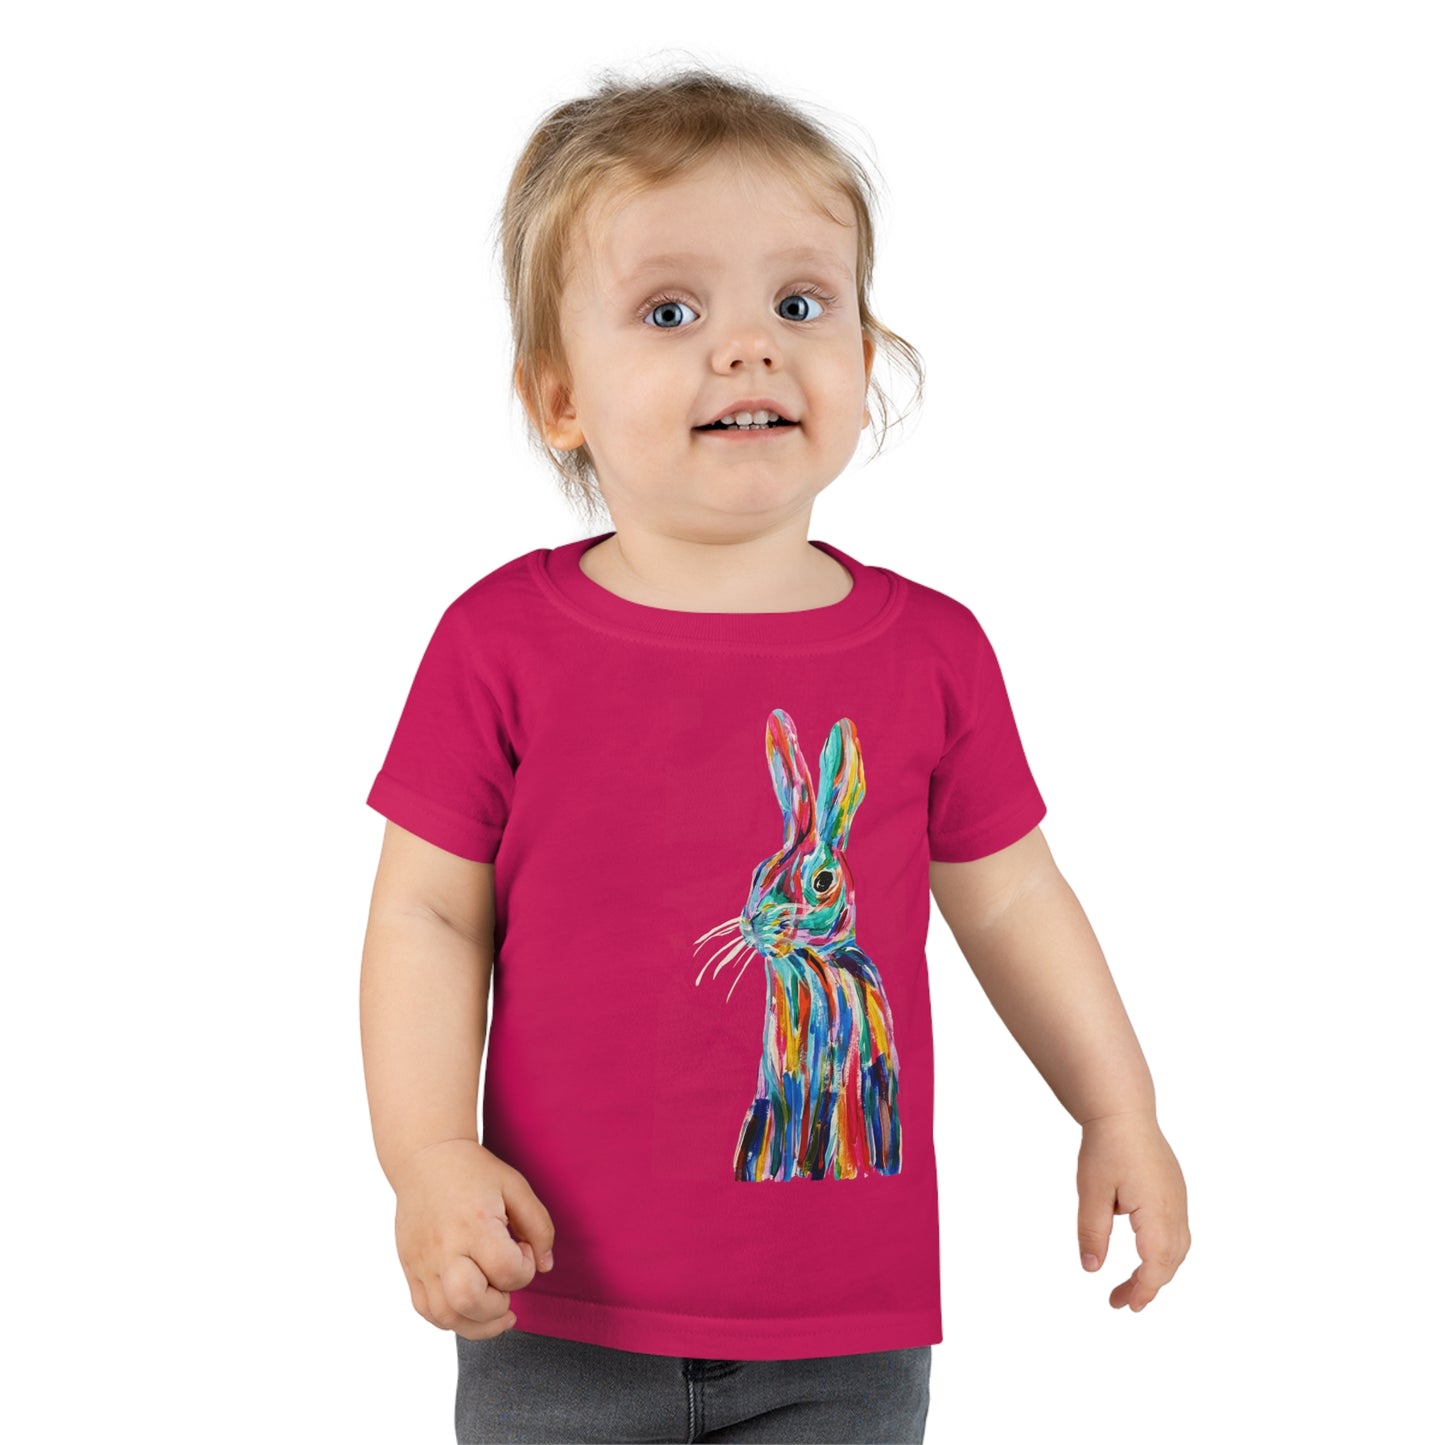 Cute Toddler Bunny Rabbit Shirt - Madness and Clarity